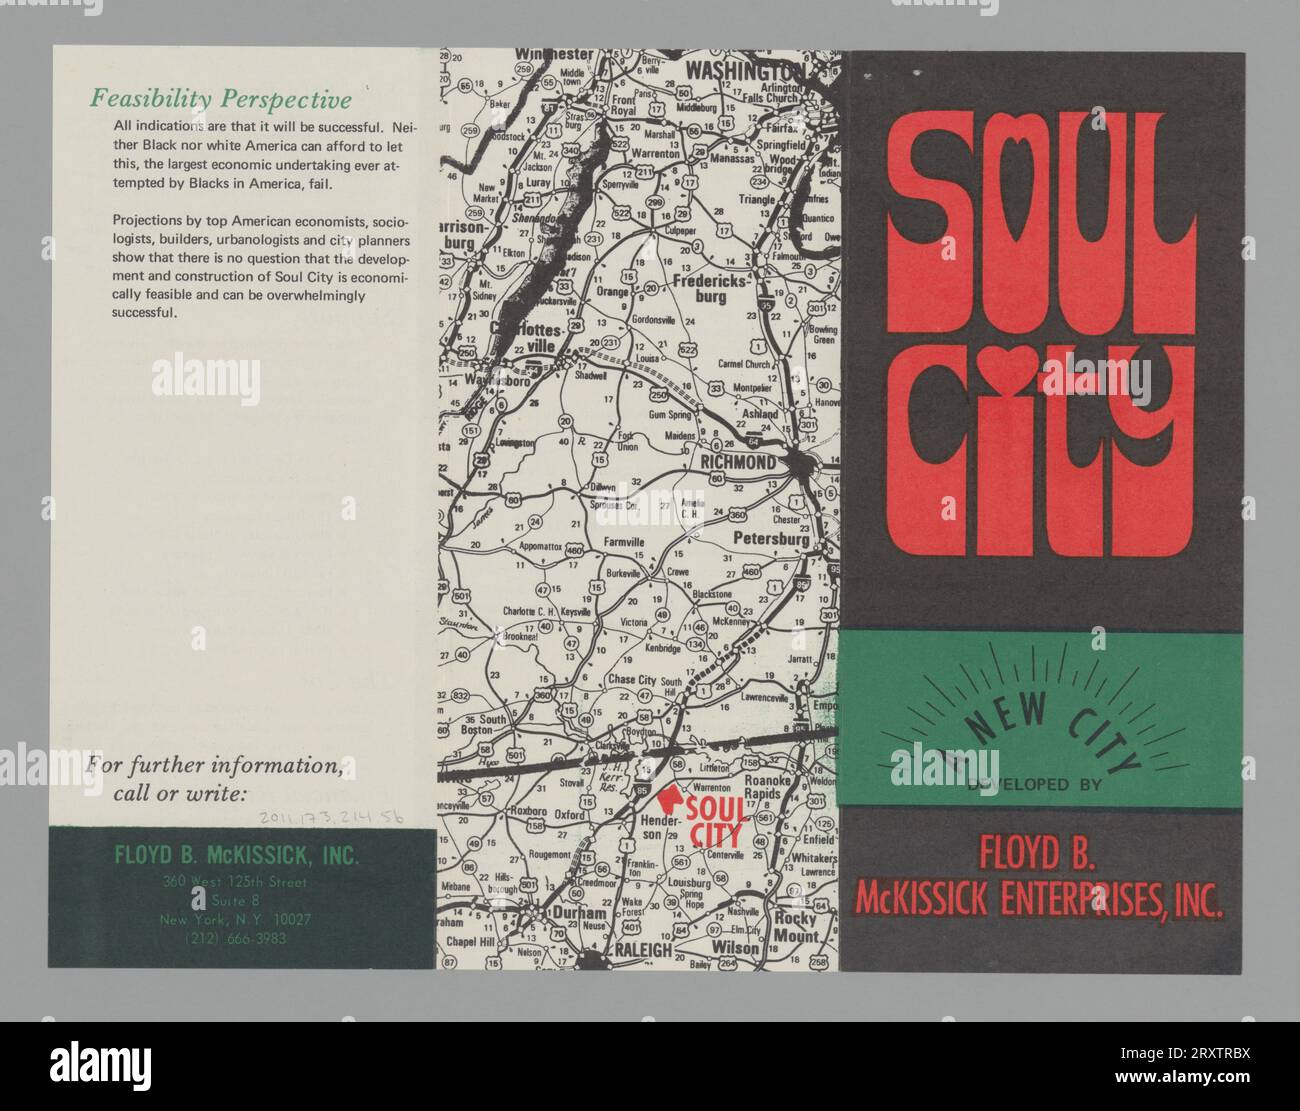 Promotional pamphlet for Soul City. The pamphlet is black with red letters and green banner across the bottom. The words [SOUL / CITY] are in red bubble letters. The rest of the cover reads [A NEW CITY/ DEVELOPED BY / FLOYD B. / McKISSICK ENTERPRISES, INC.]. The inside of the pamphlet describes Soul City and outlines why the city is necessary and how it will operate and sustain iself. The back of the pamphlet is a black and white map showing the area from Washington, D.C. to Raleigh, North Carolina. [Soul City] is highlighted in red letters on the map just north of Raleigh. Stock Photo